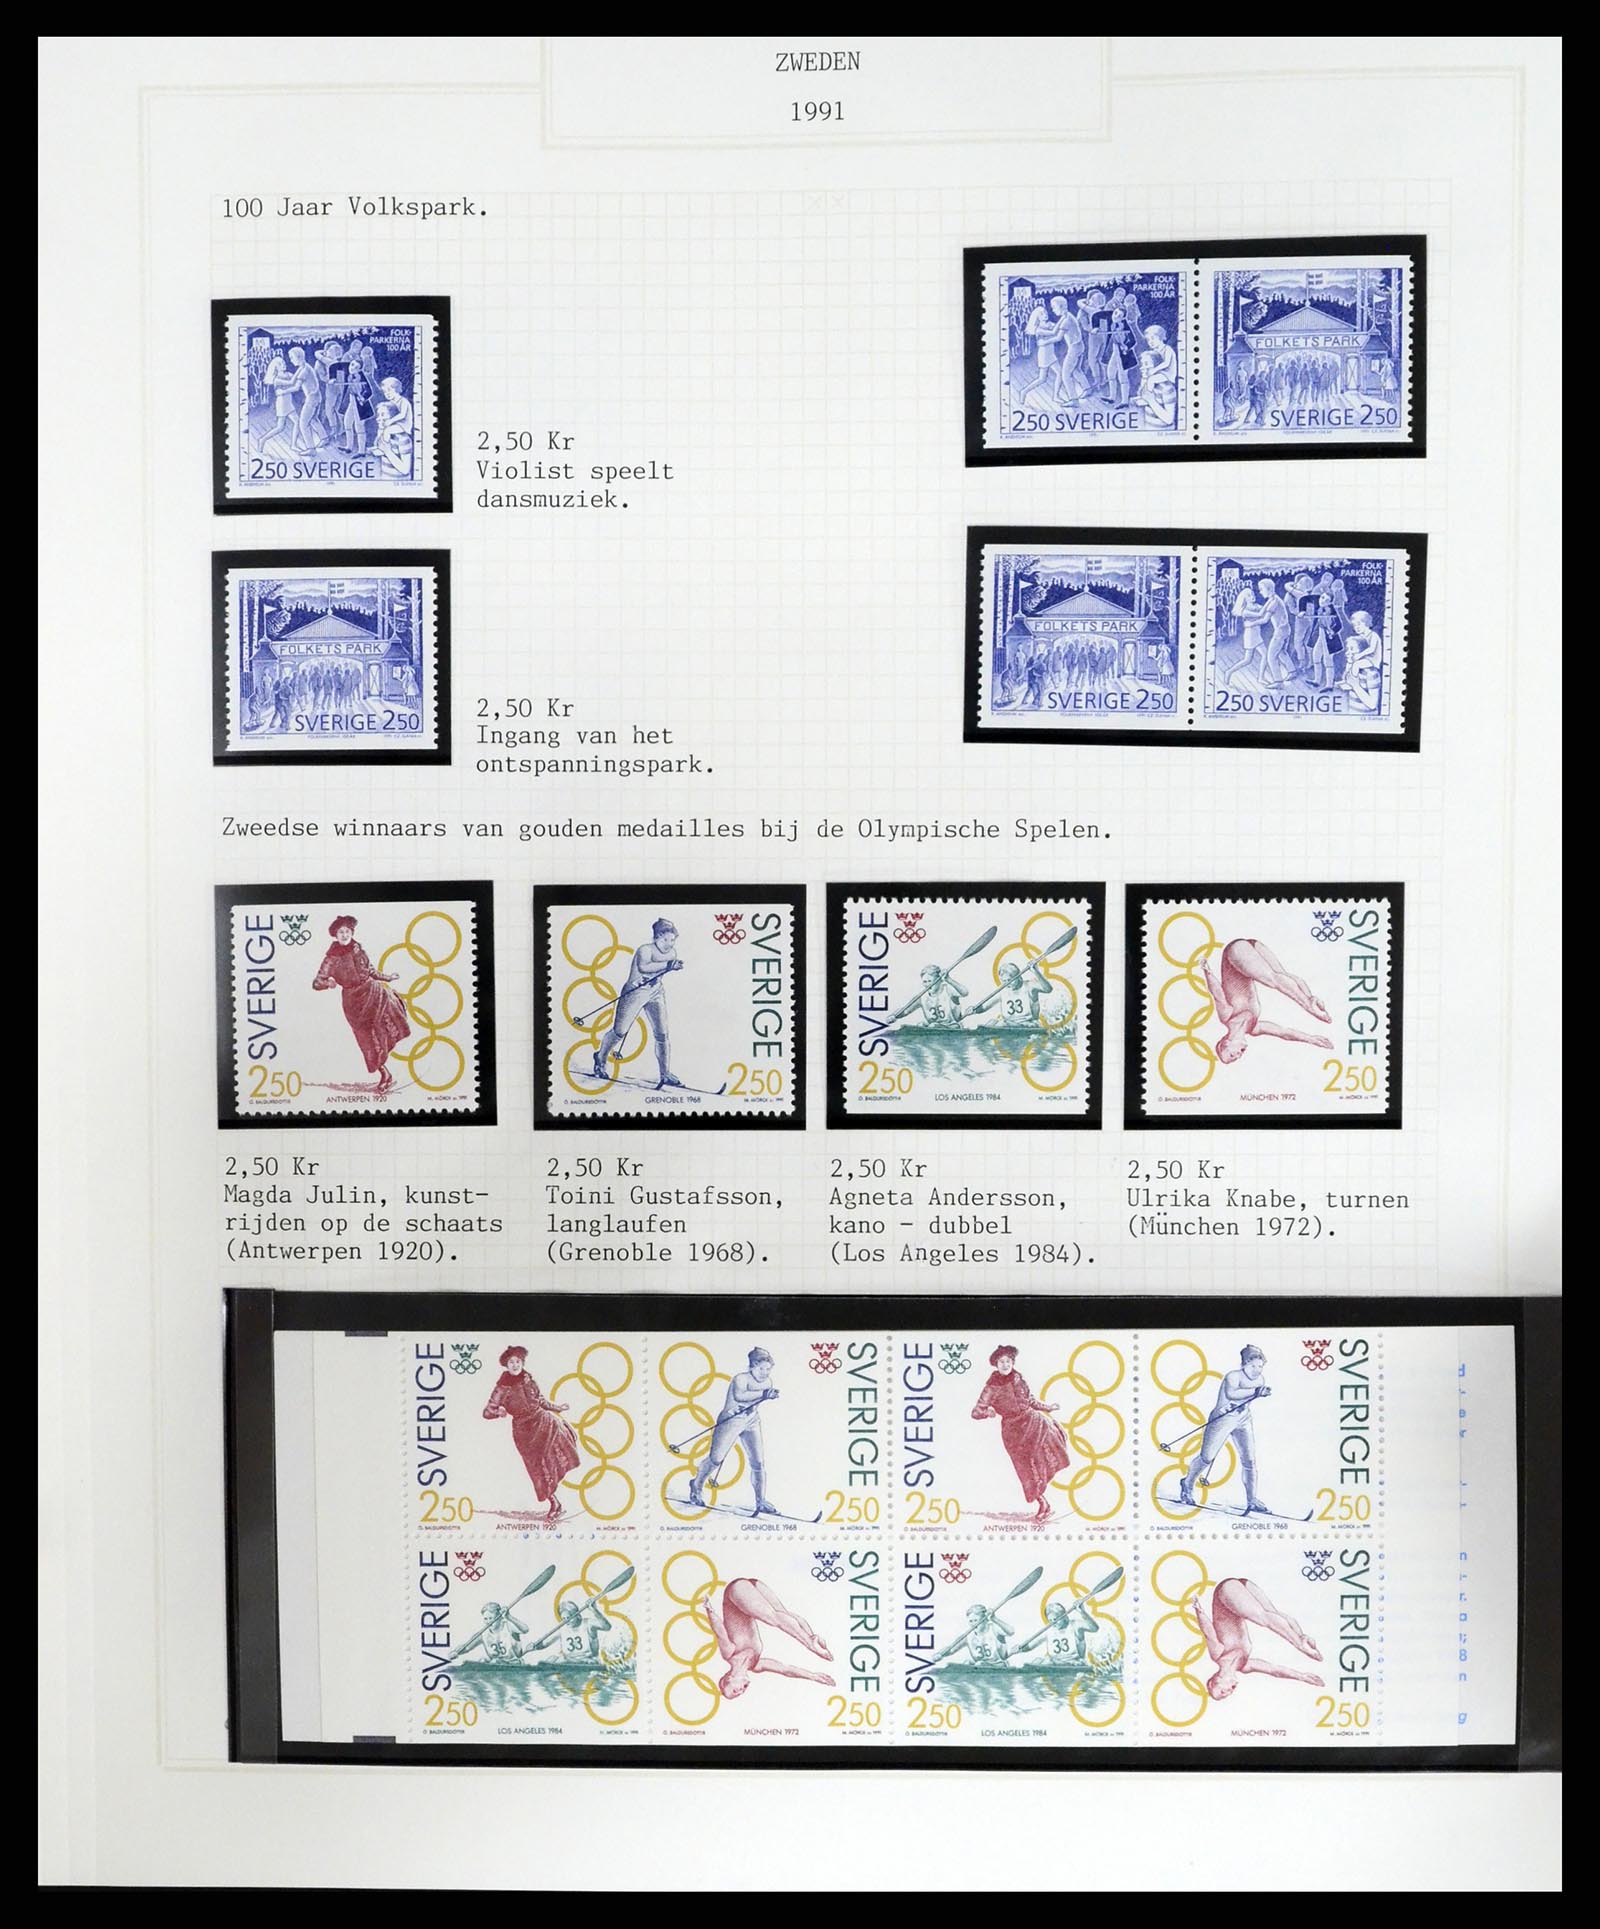 37292 382 - Stamp collection 37292 Sweden 1910-1994.